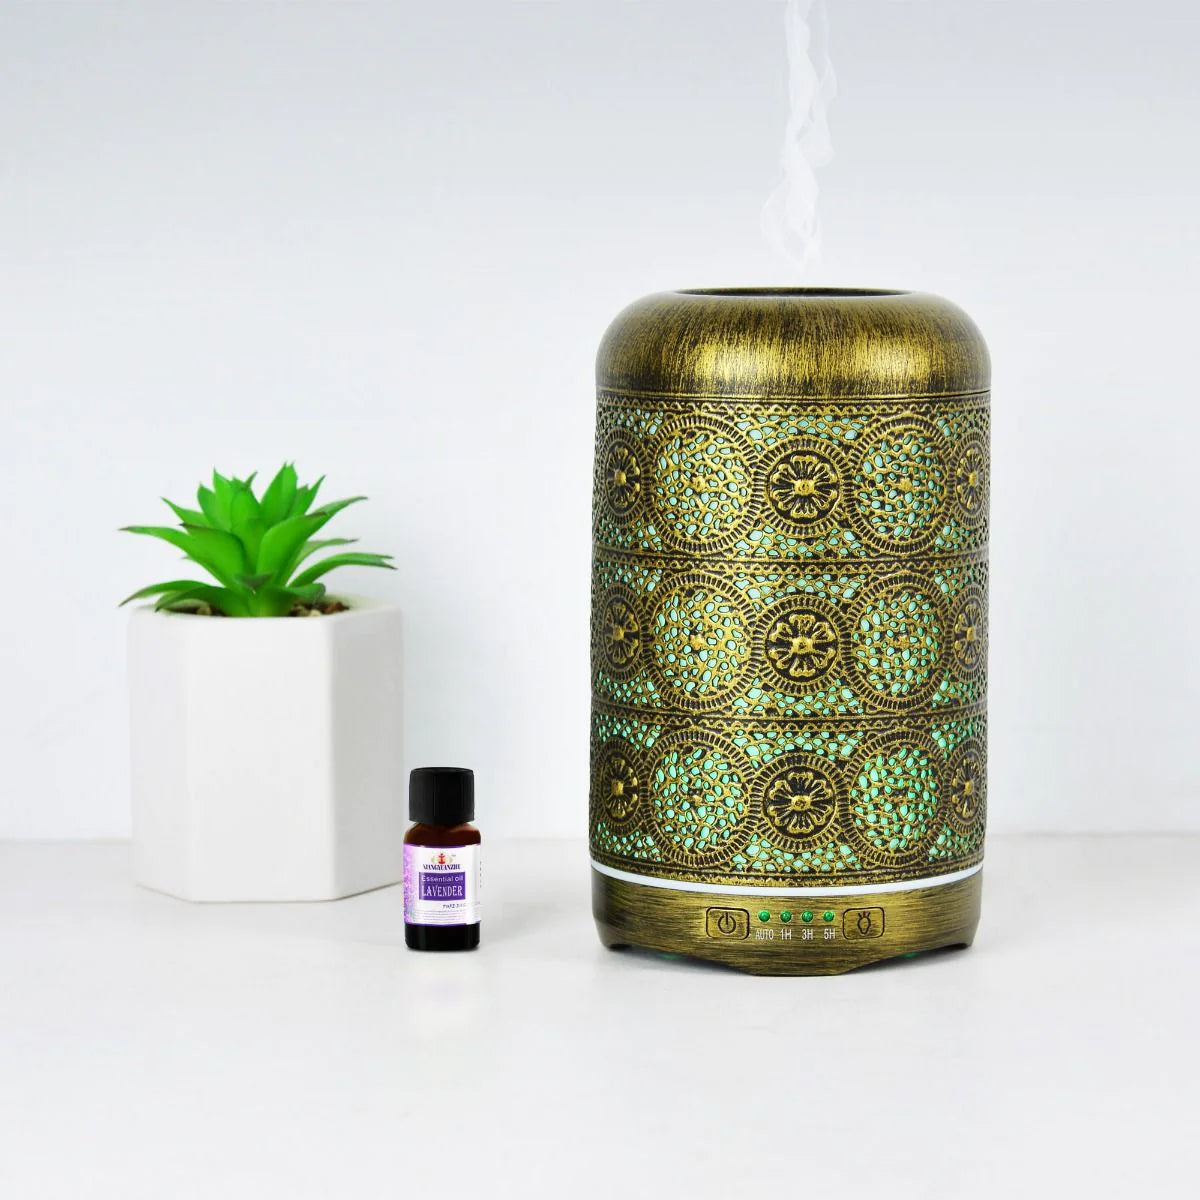 A Diffuser's Impact on Mood and Mind